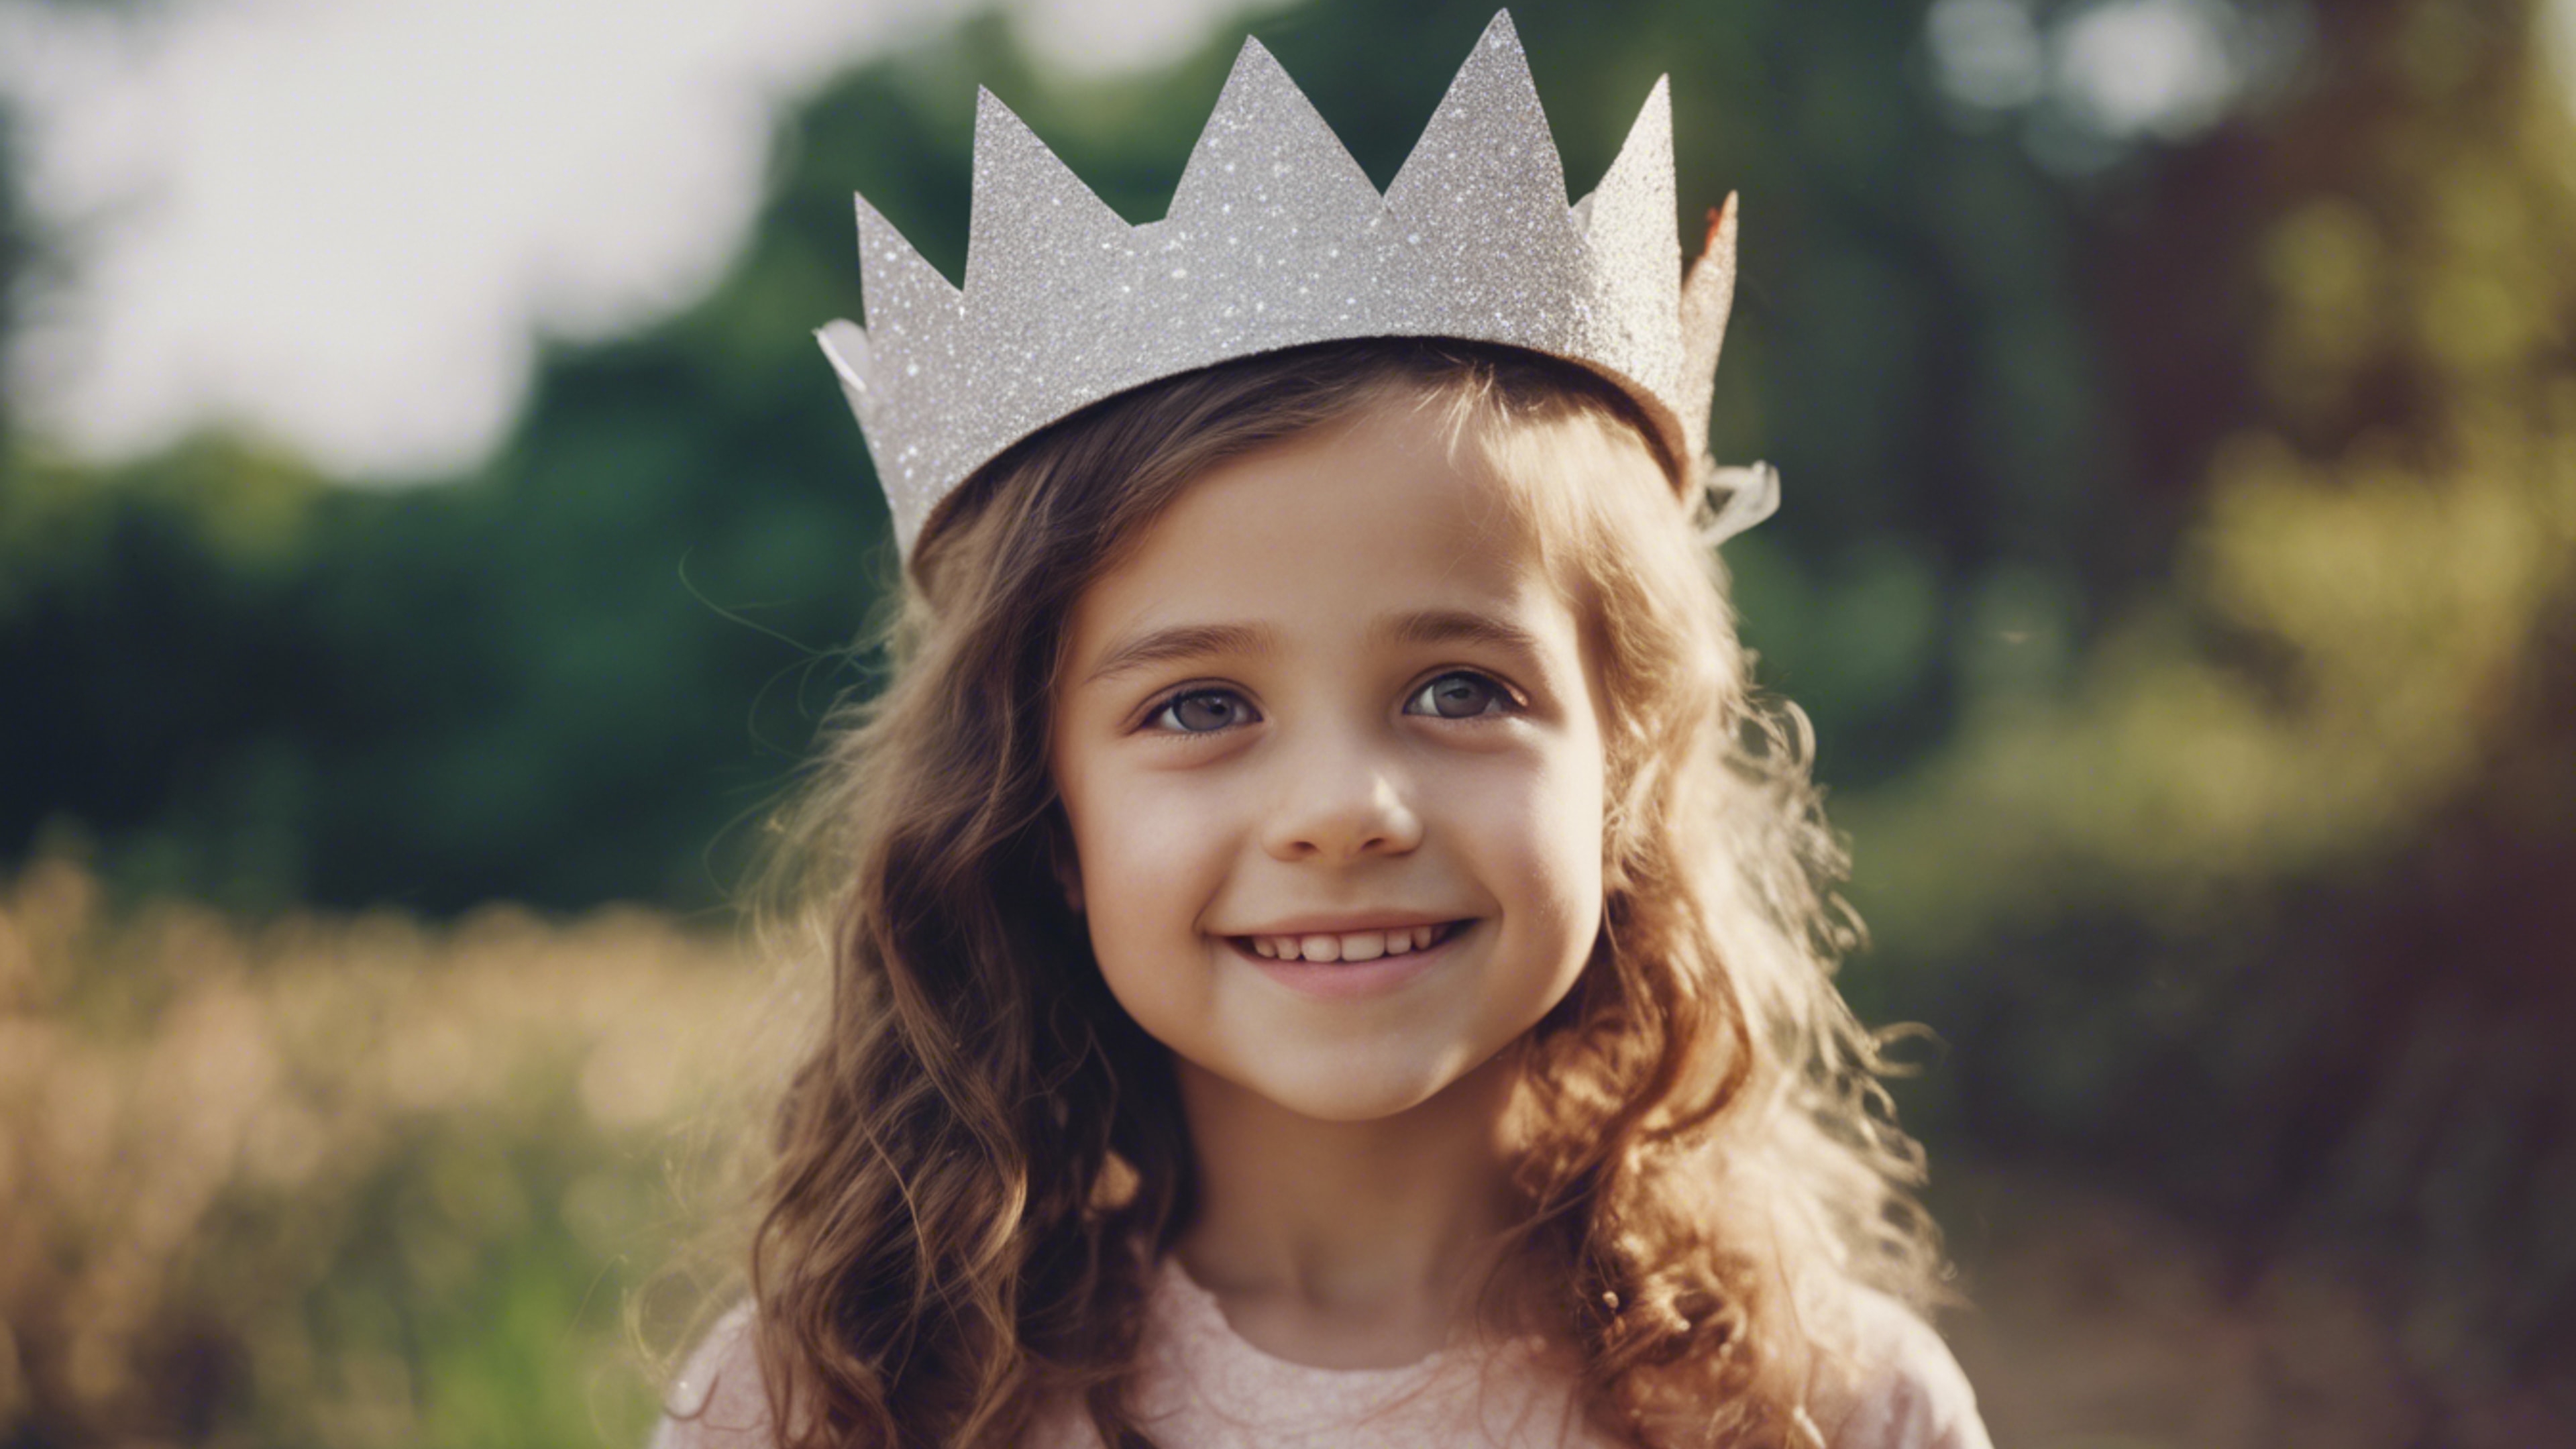 A young girl with sparkling eyes, happily wearing a homemade paper crown. 벽지[aa9d8265bf9b488b9728]